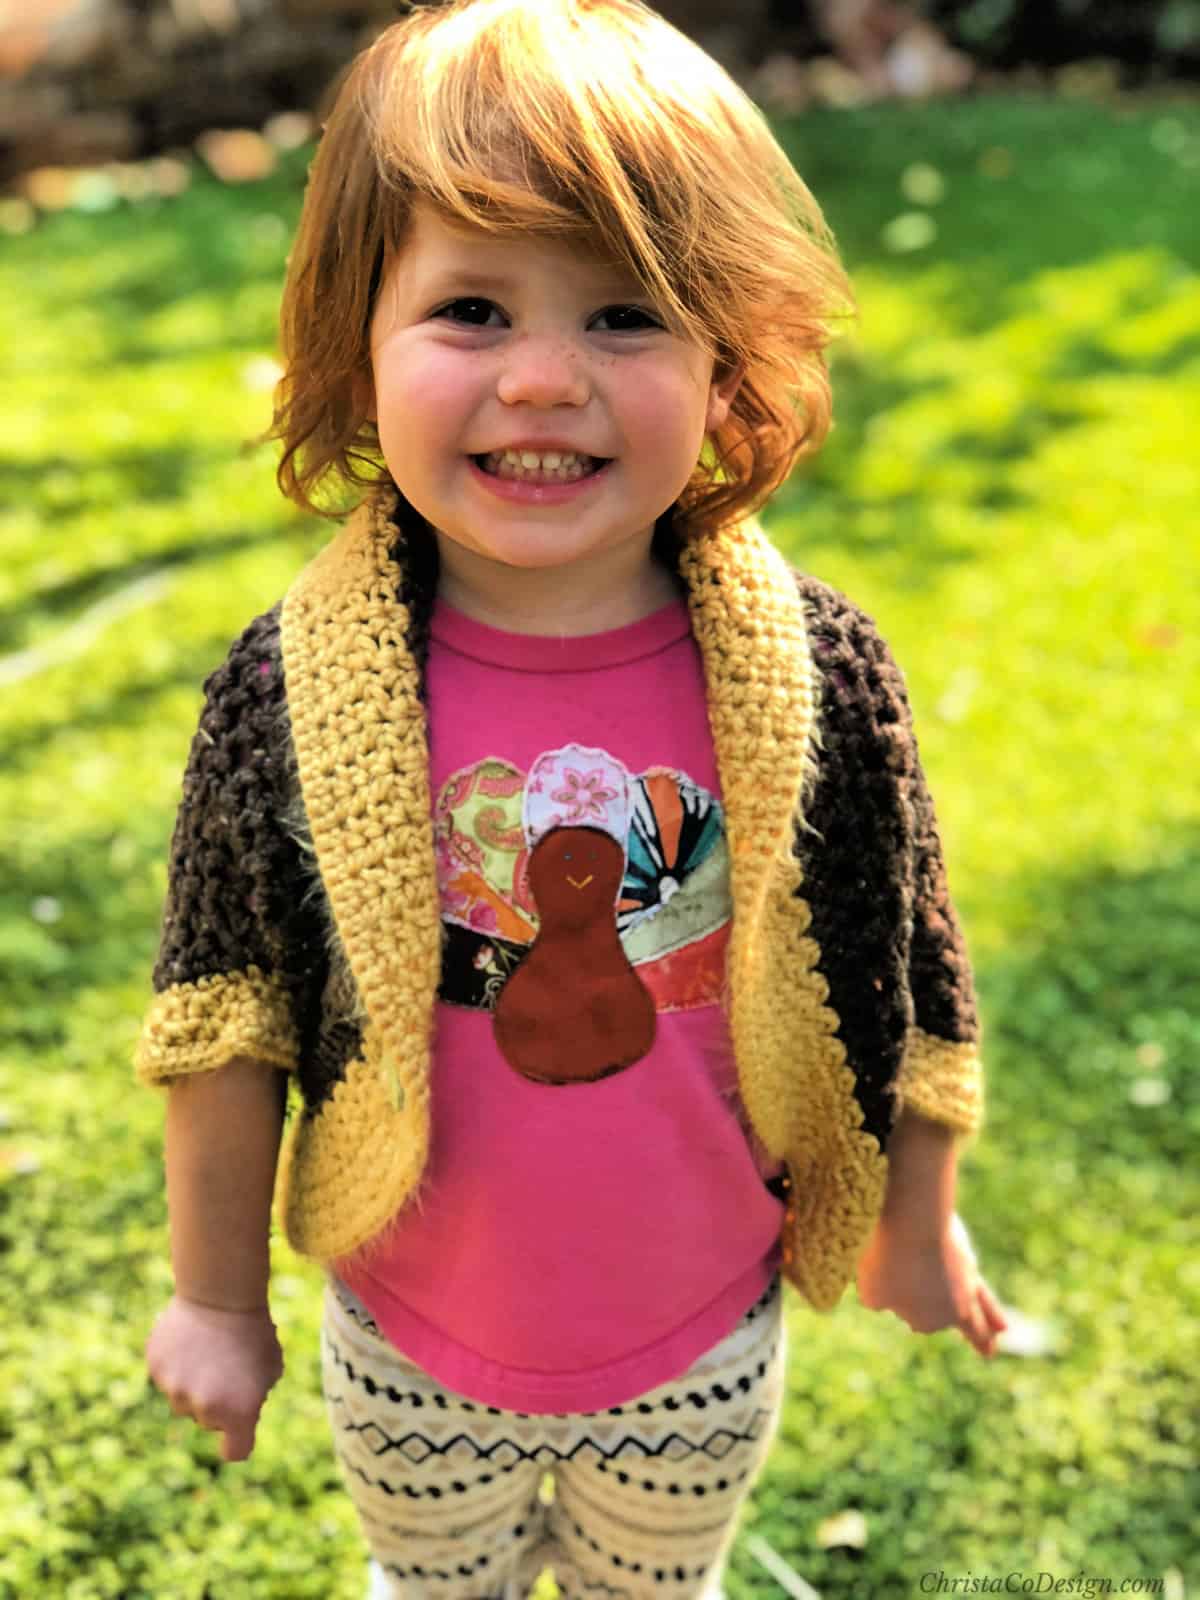 Girl with golden and brown shrug on smiling.